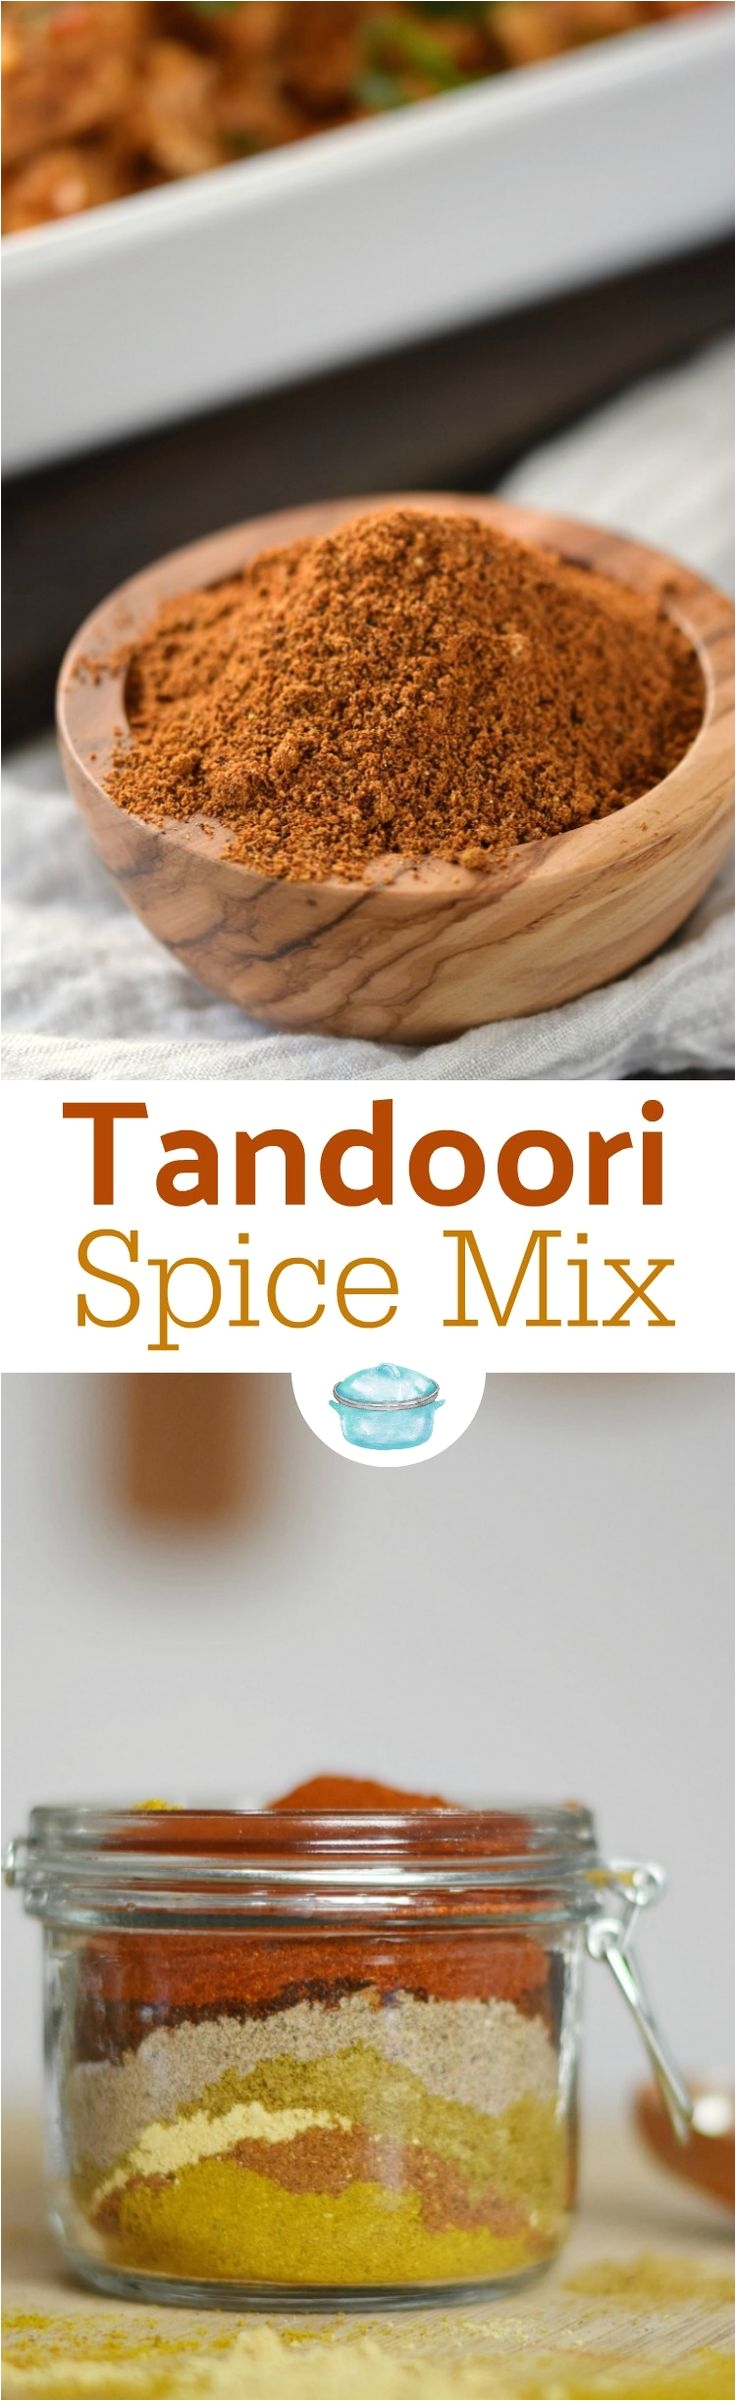 this tandoori spice mix is simple to prepare and uses spices that you probably already have